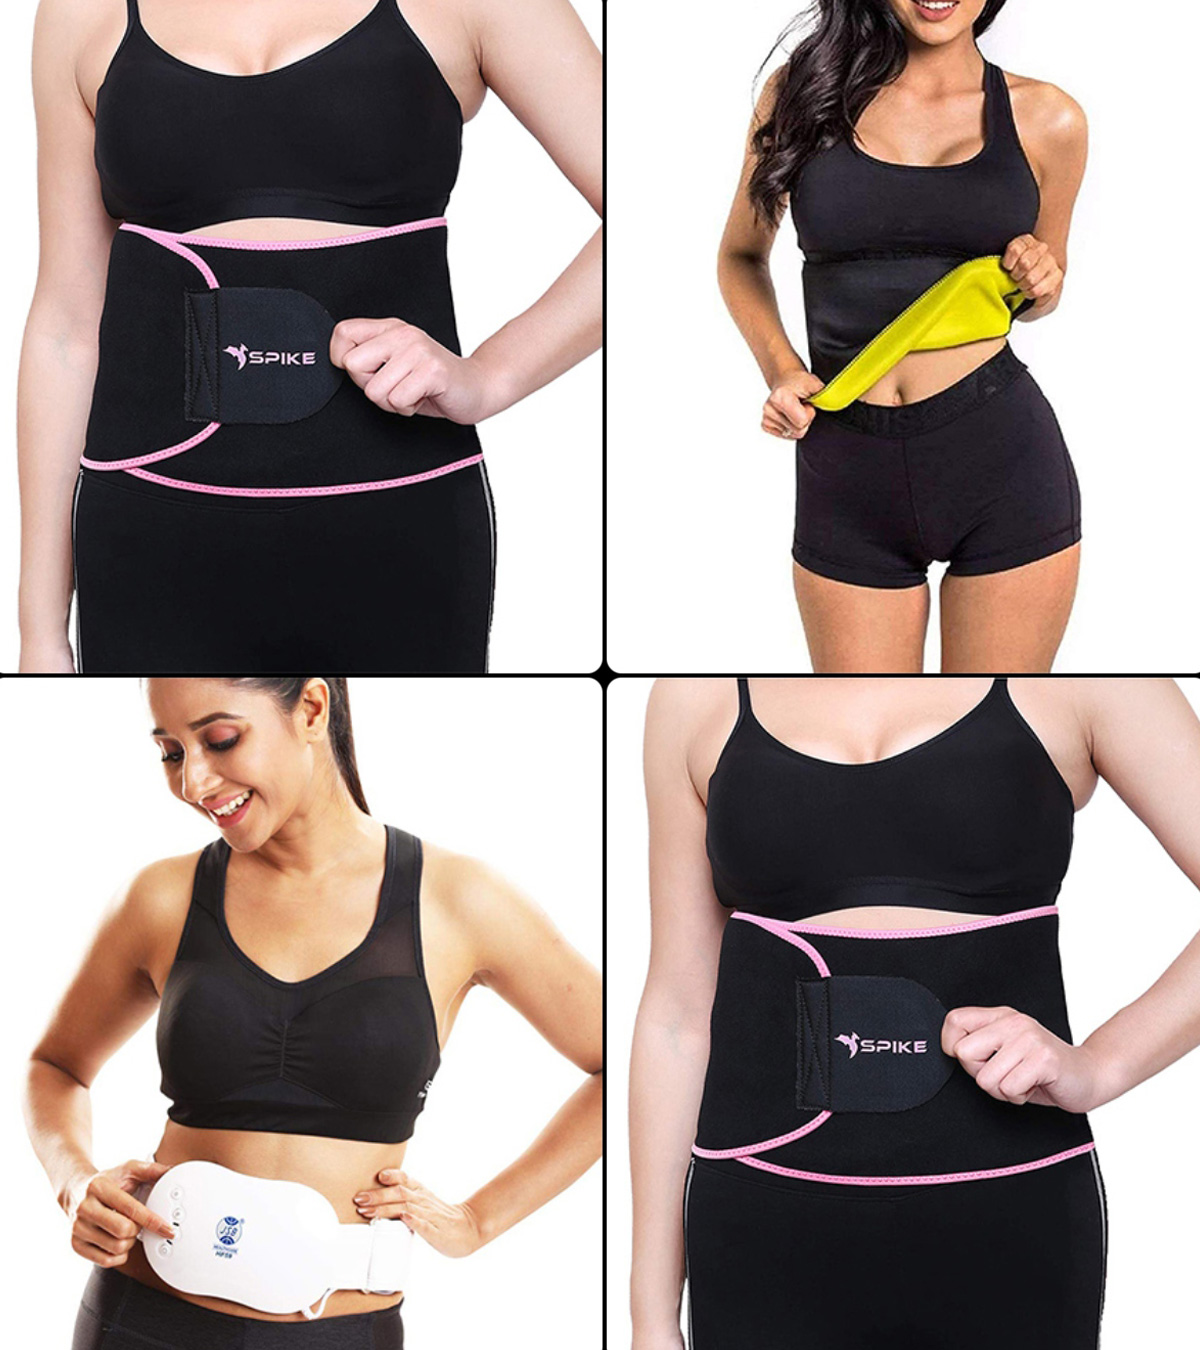 Abdominal belts to reduce belly fat: Find out if doctors recommend